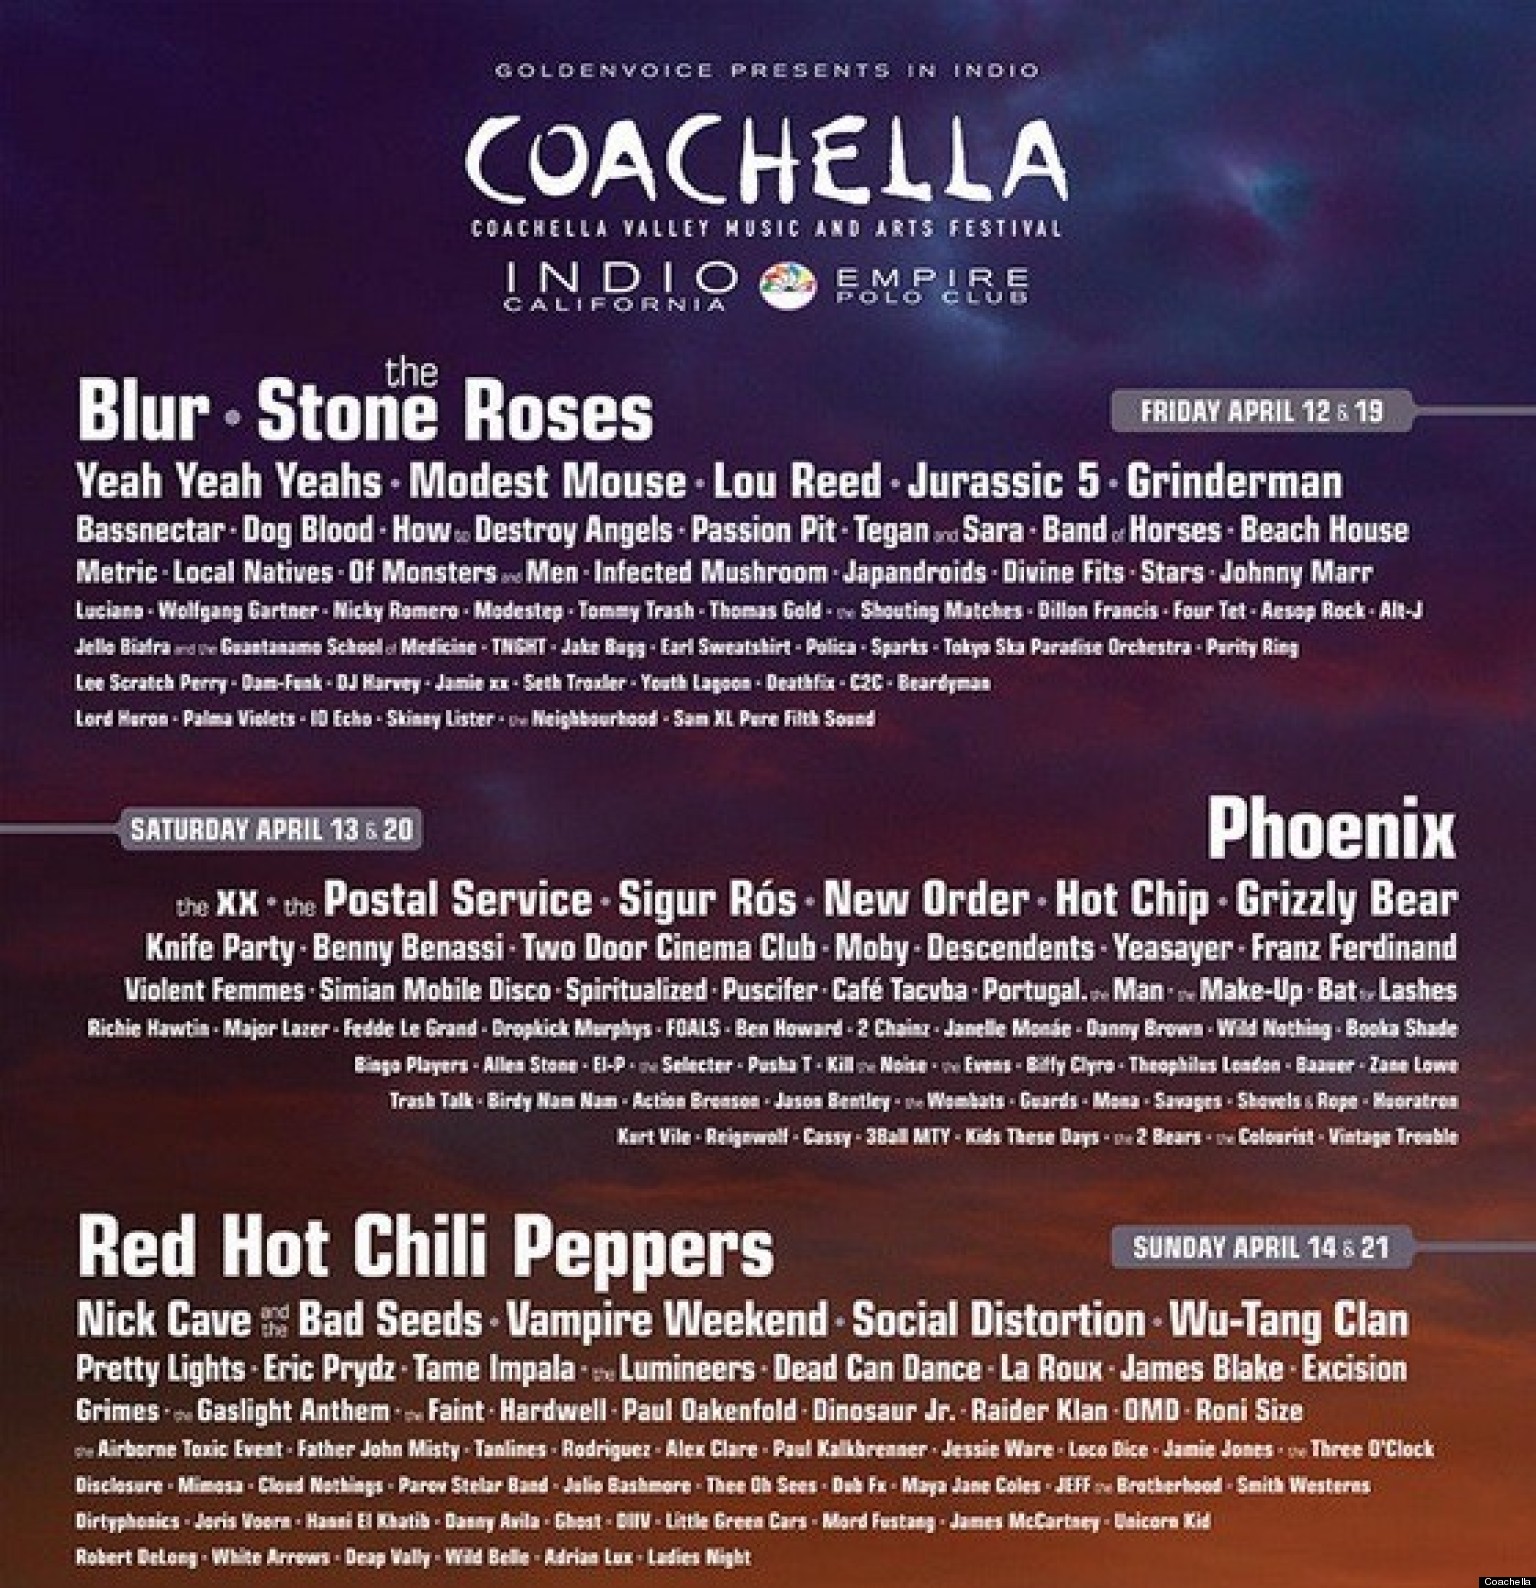 Coachella 2013 Lineup Announced: Blur, The Stone Roses, Phoenix And Red